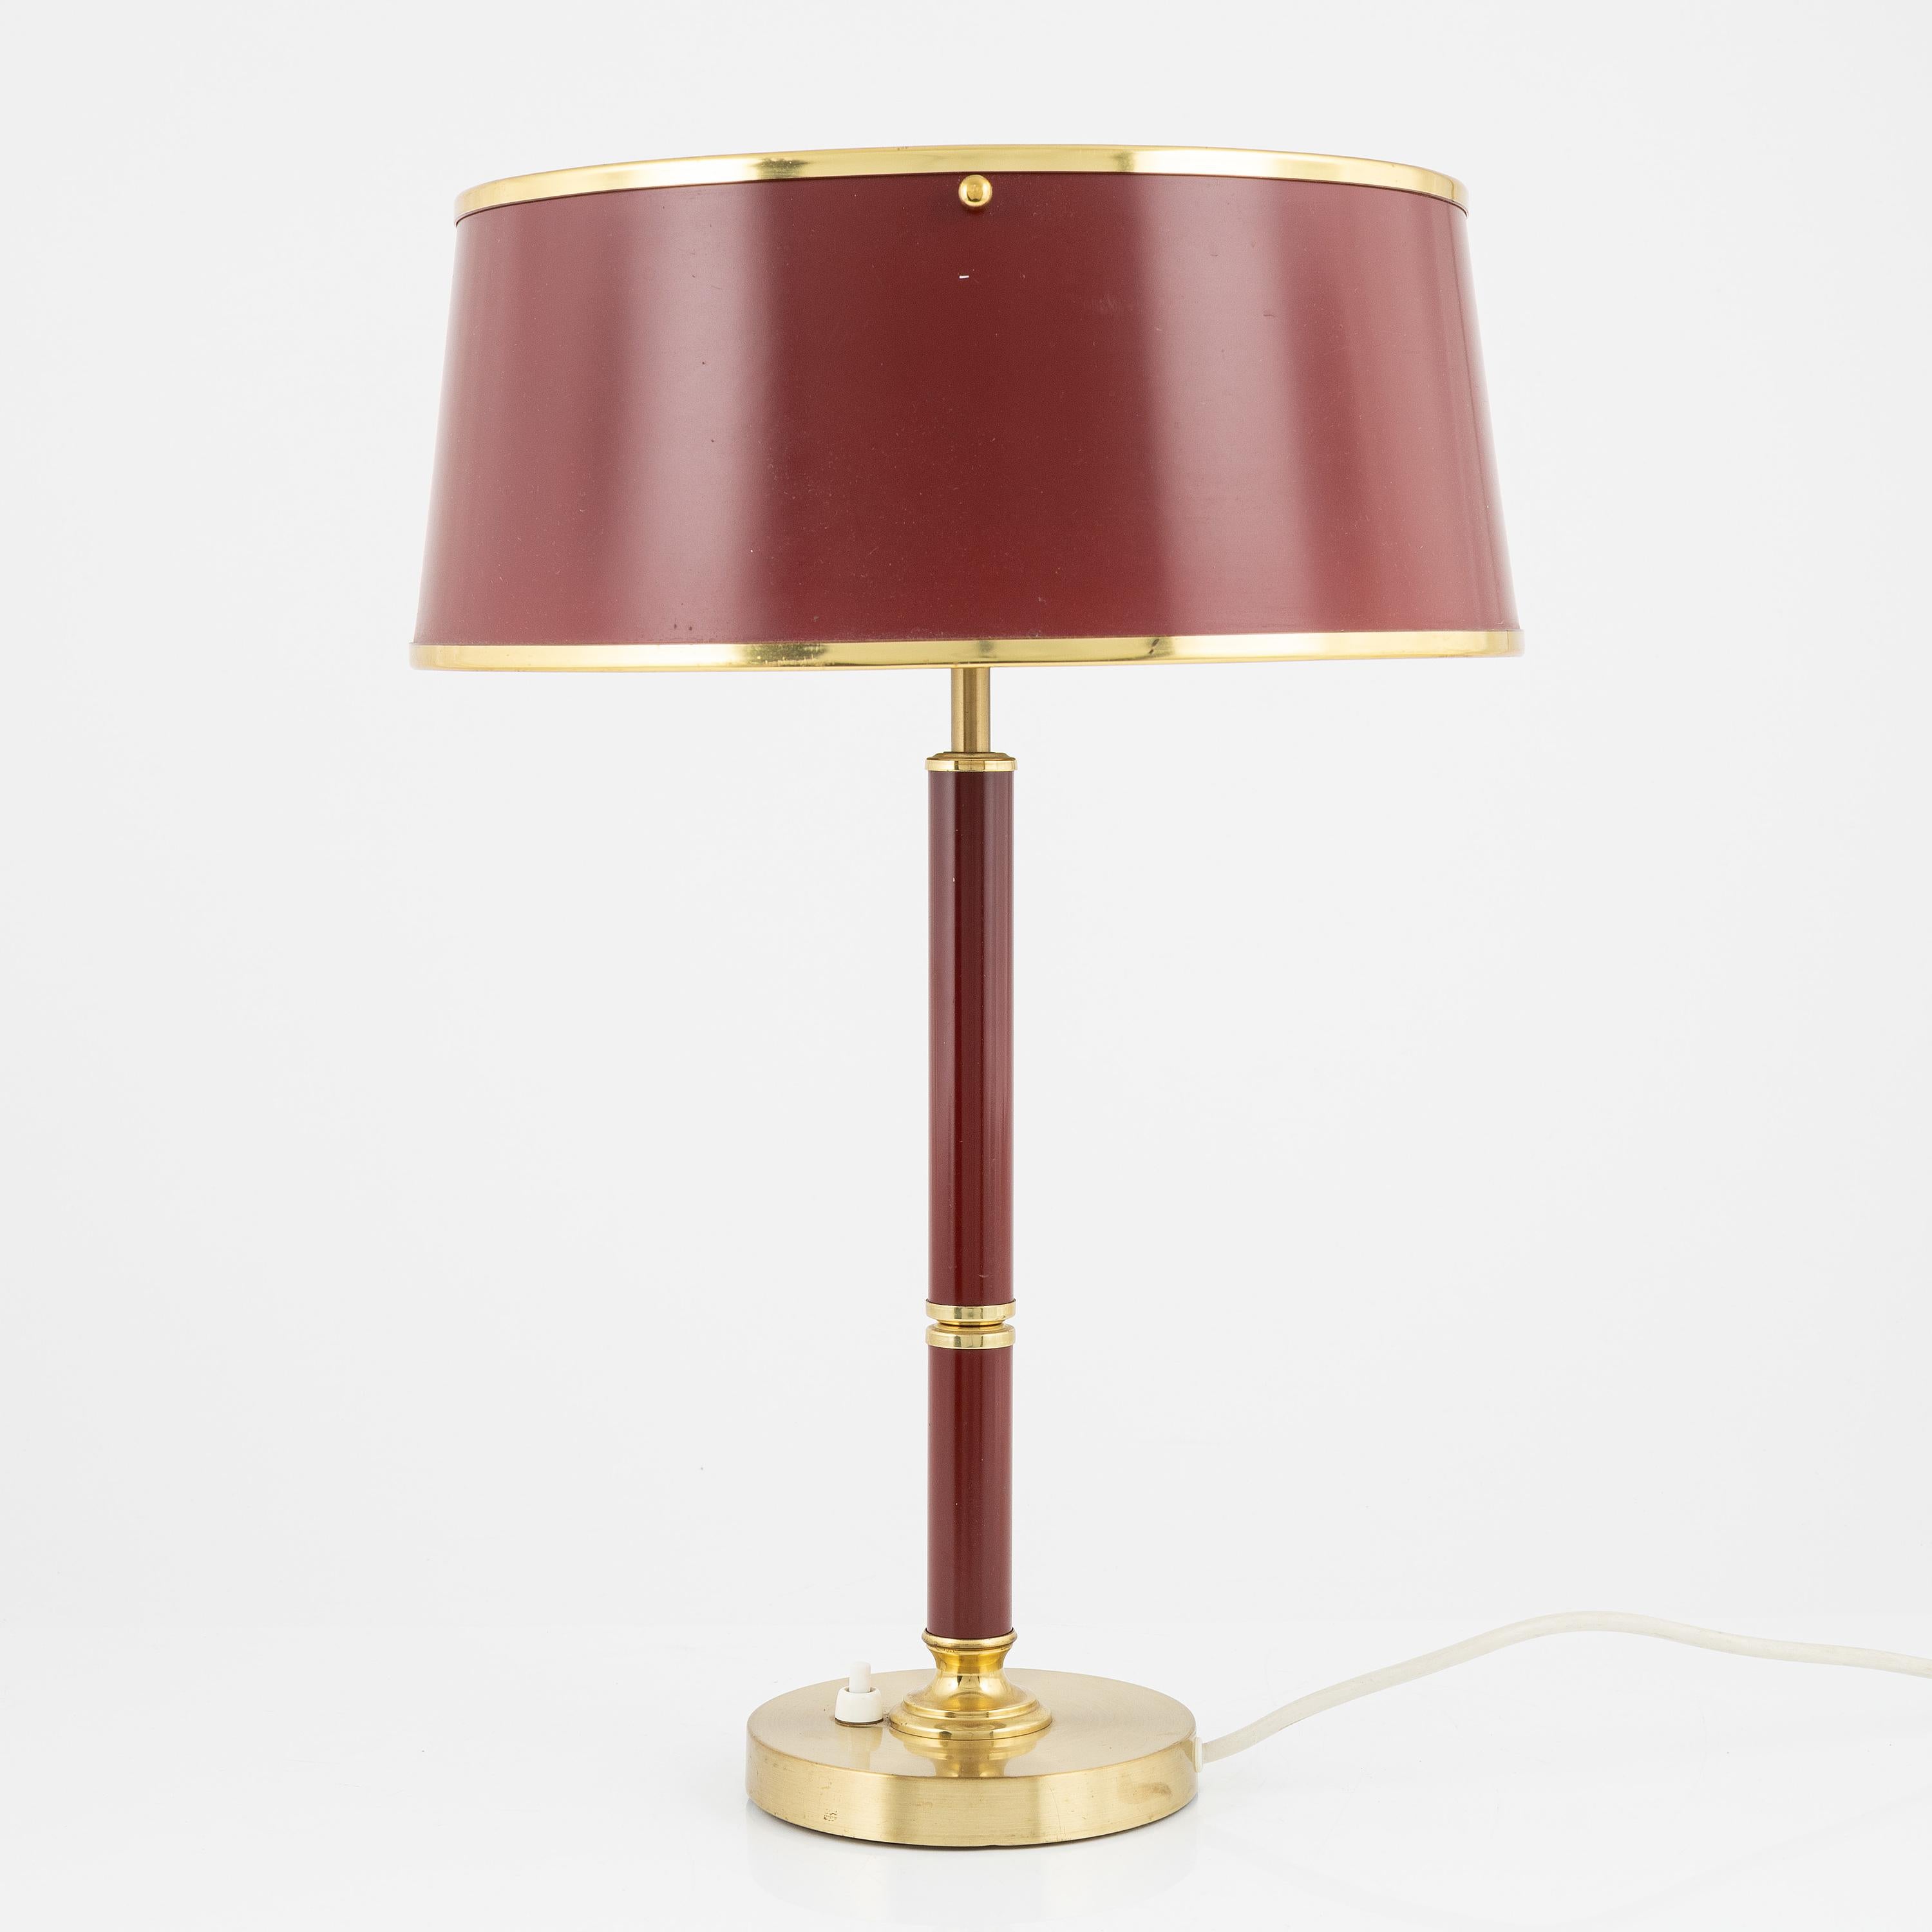  Borens table lamp Model 8423 red lacquer Sweden 1970 For Sale 1